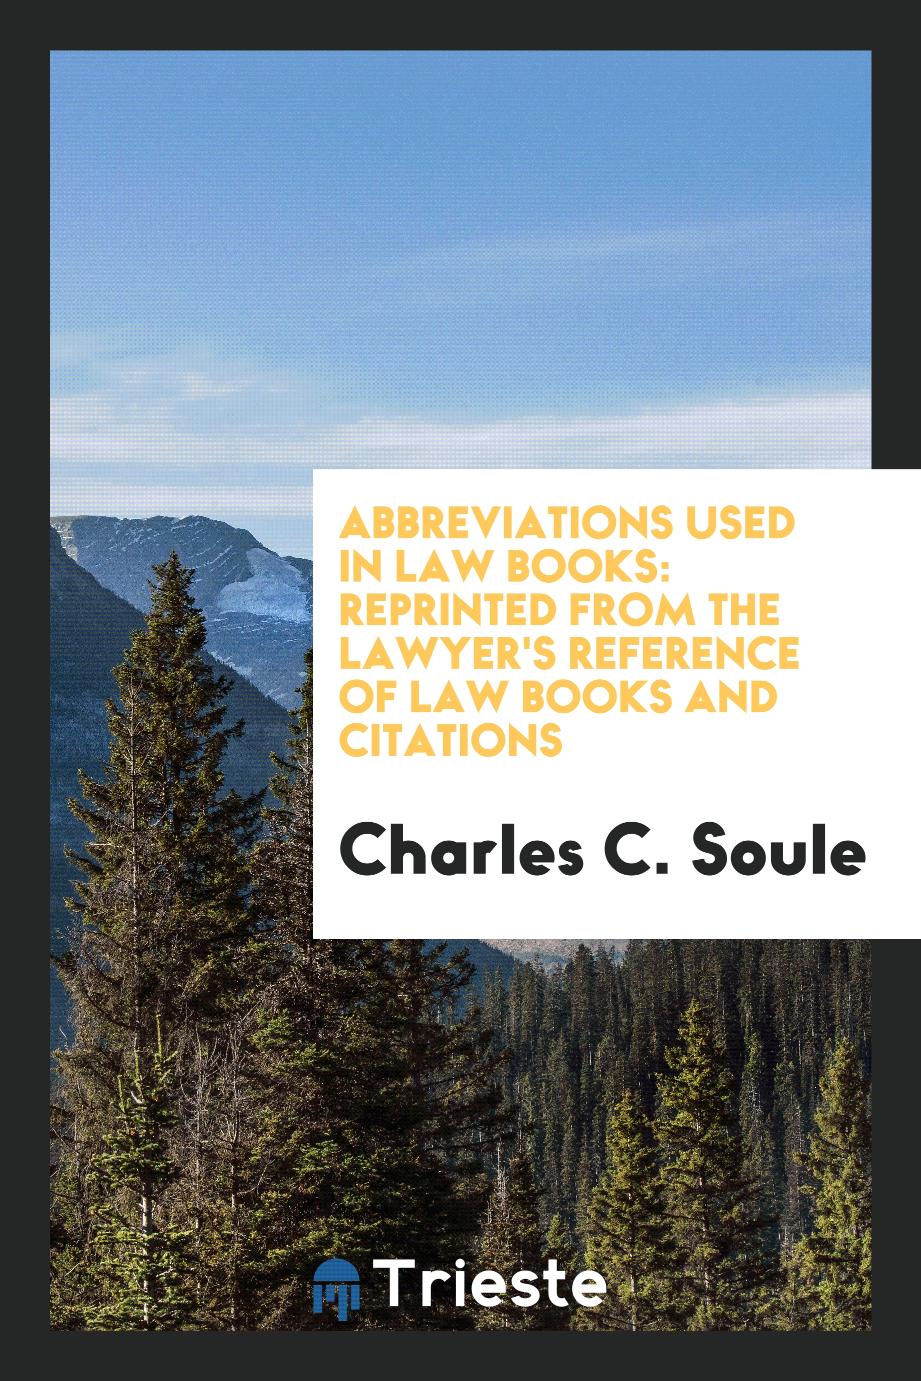 Abbreviations Used in Law Books: Reprinted from The Lawyer's Reference of Law Books and Citations